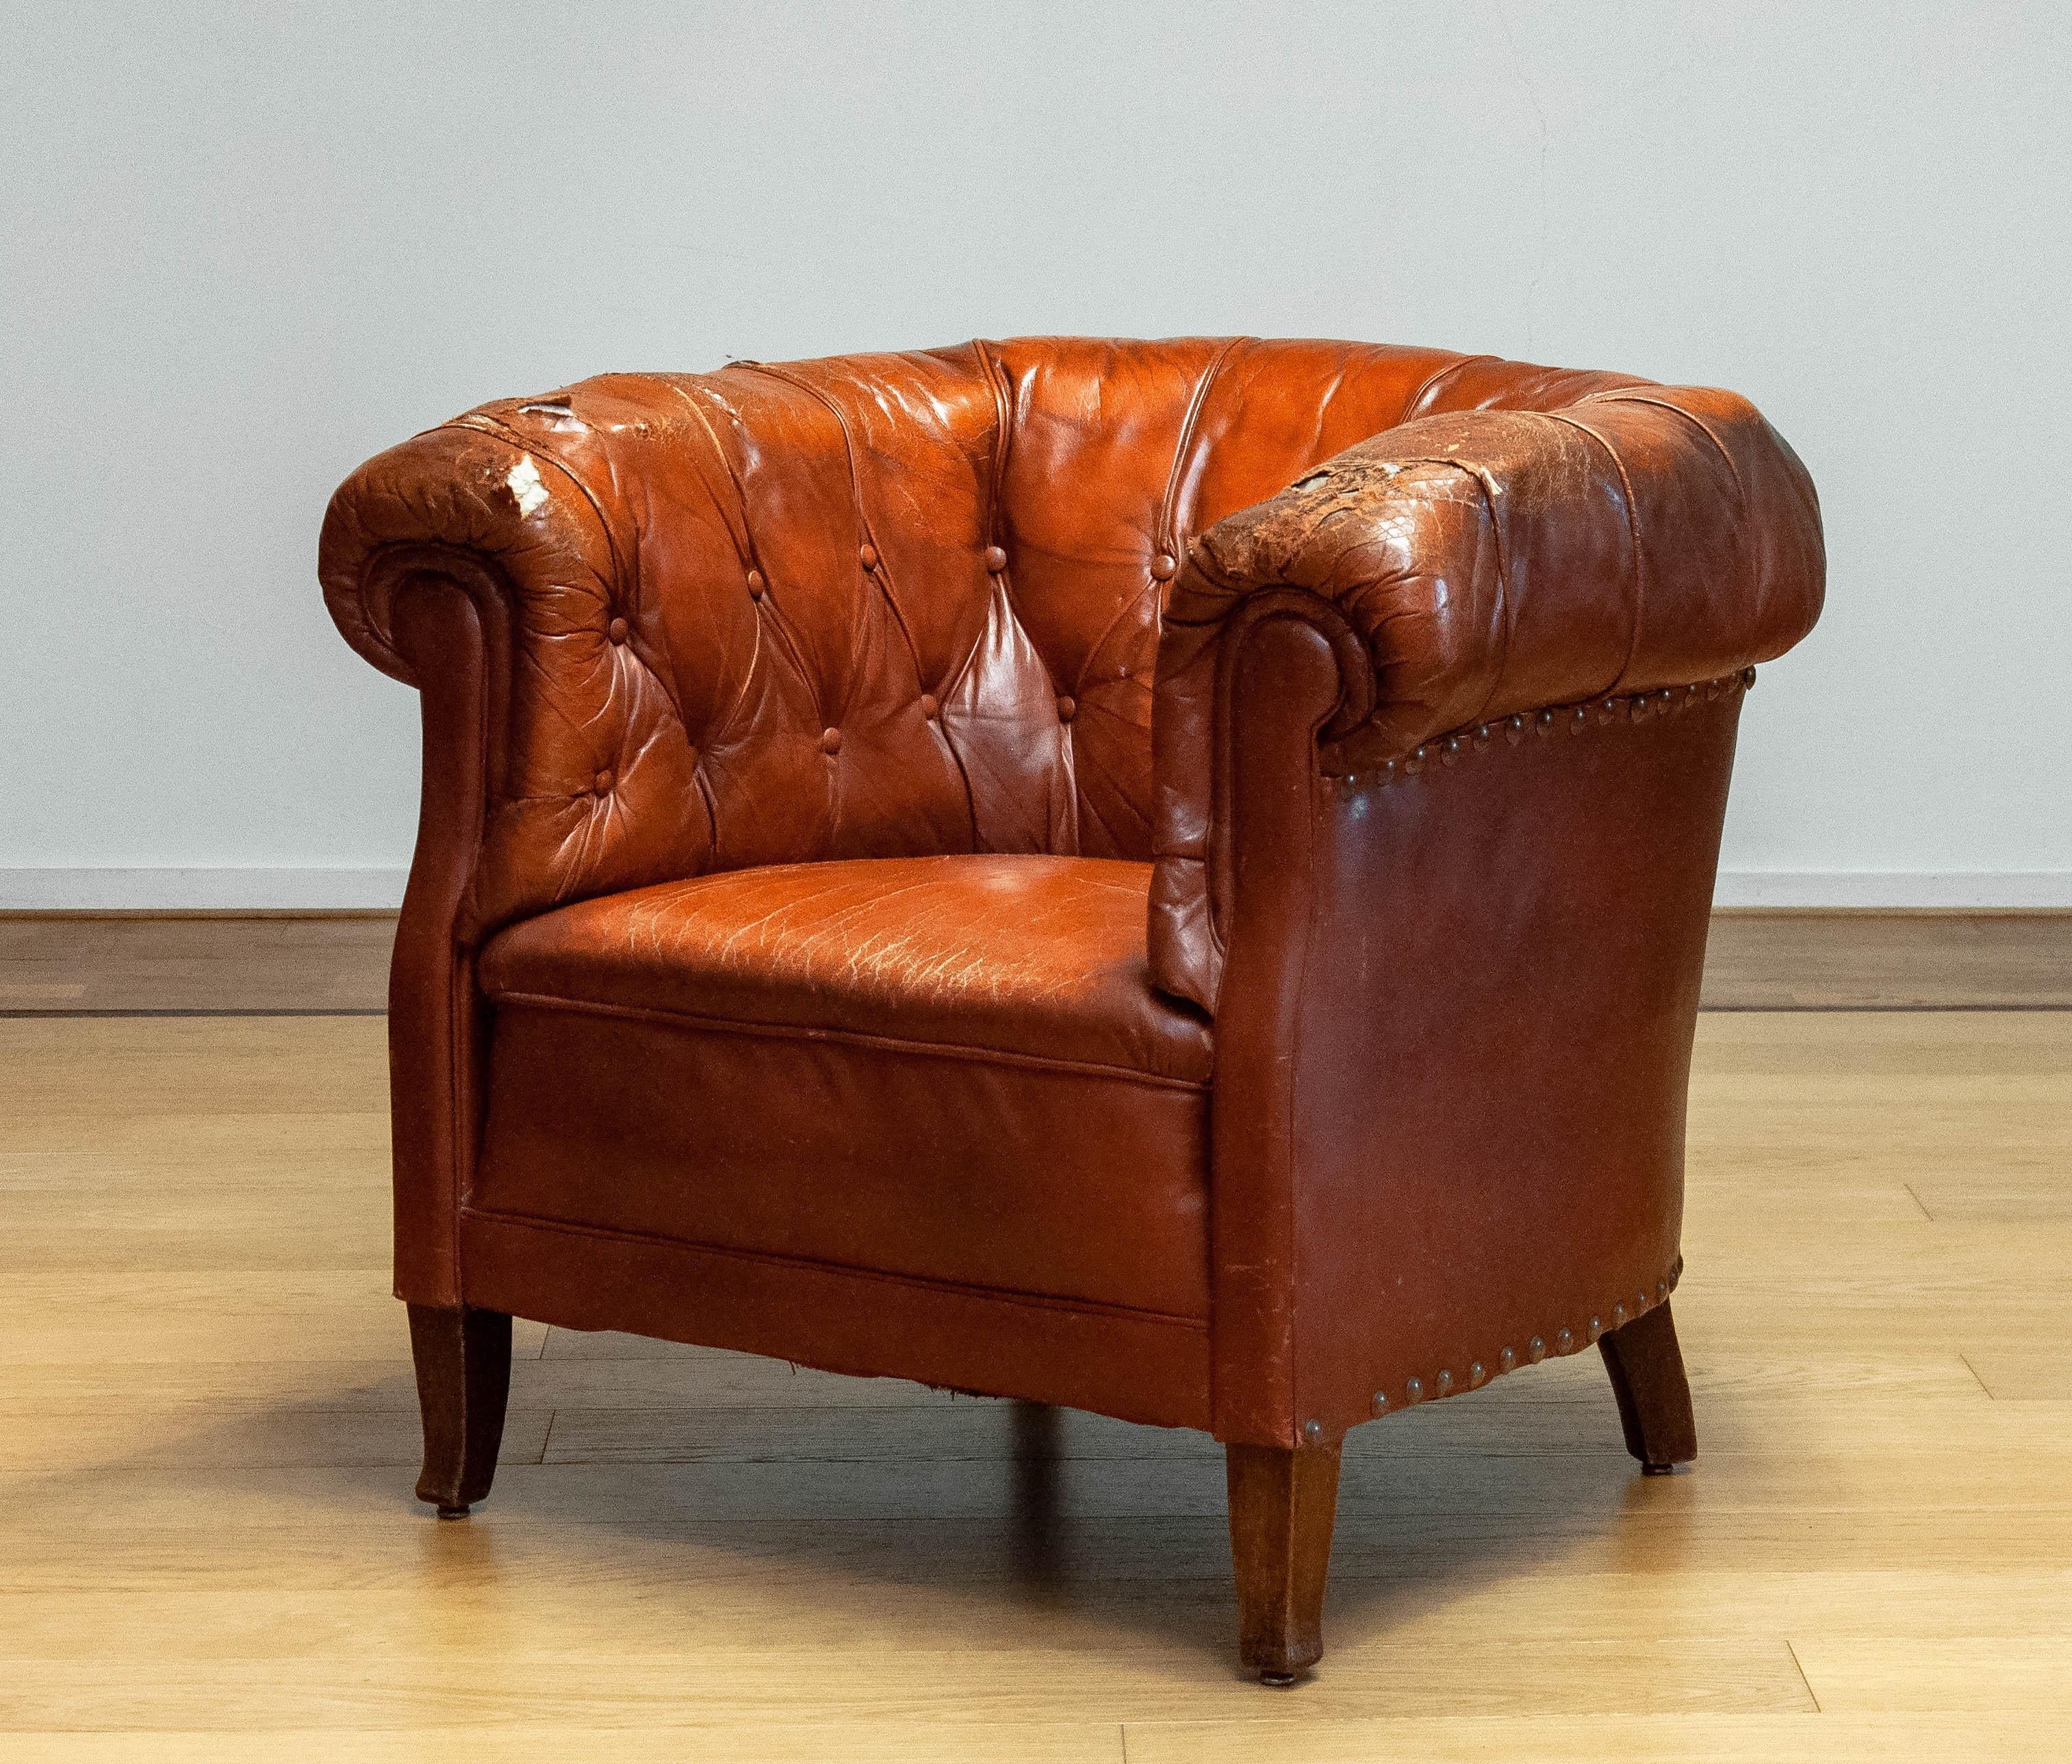 Absolutely fantastic and beautiful authentic ' Chesterfield model' club chair made in Sweden in the 1940s.
The great vintage / antique patina what gives the chair her absolutely unique patina makes this chair an absolute decorative object for your